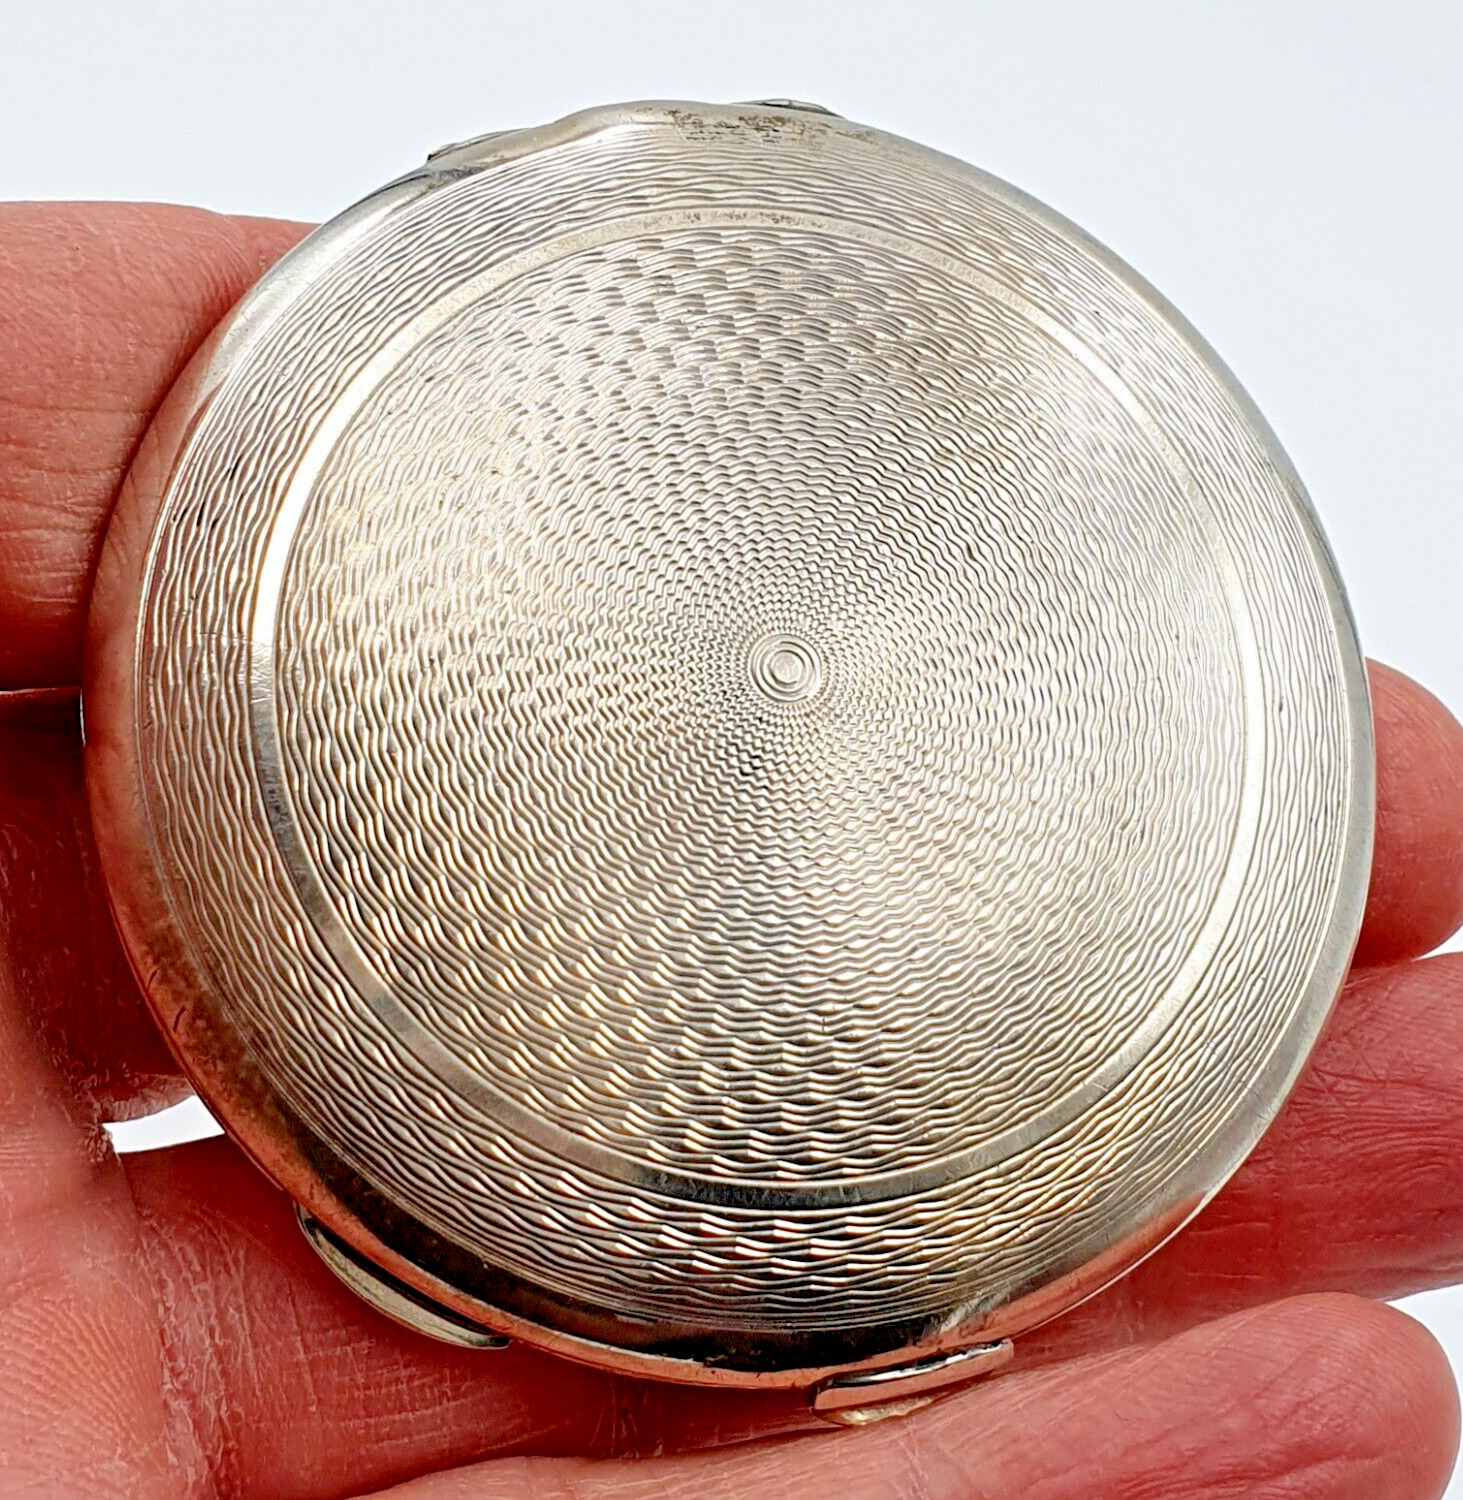 Vintage 1950\'s sterling silver engine turned ladies mirror compact - Pretty item